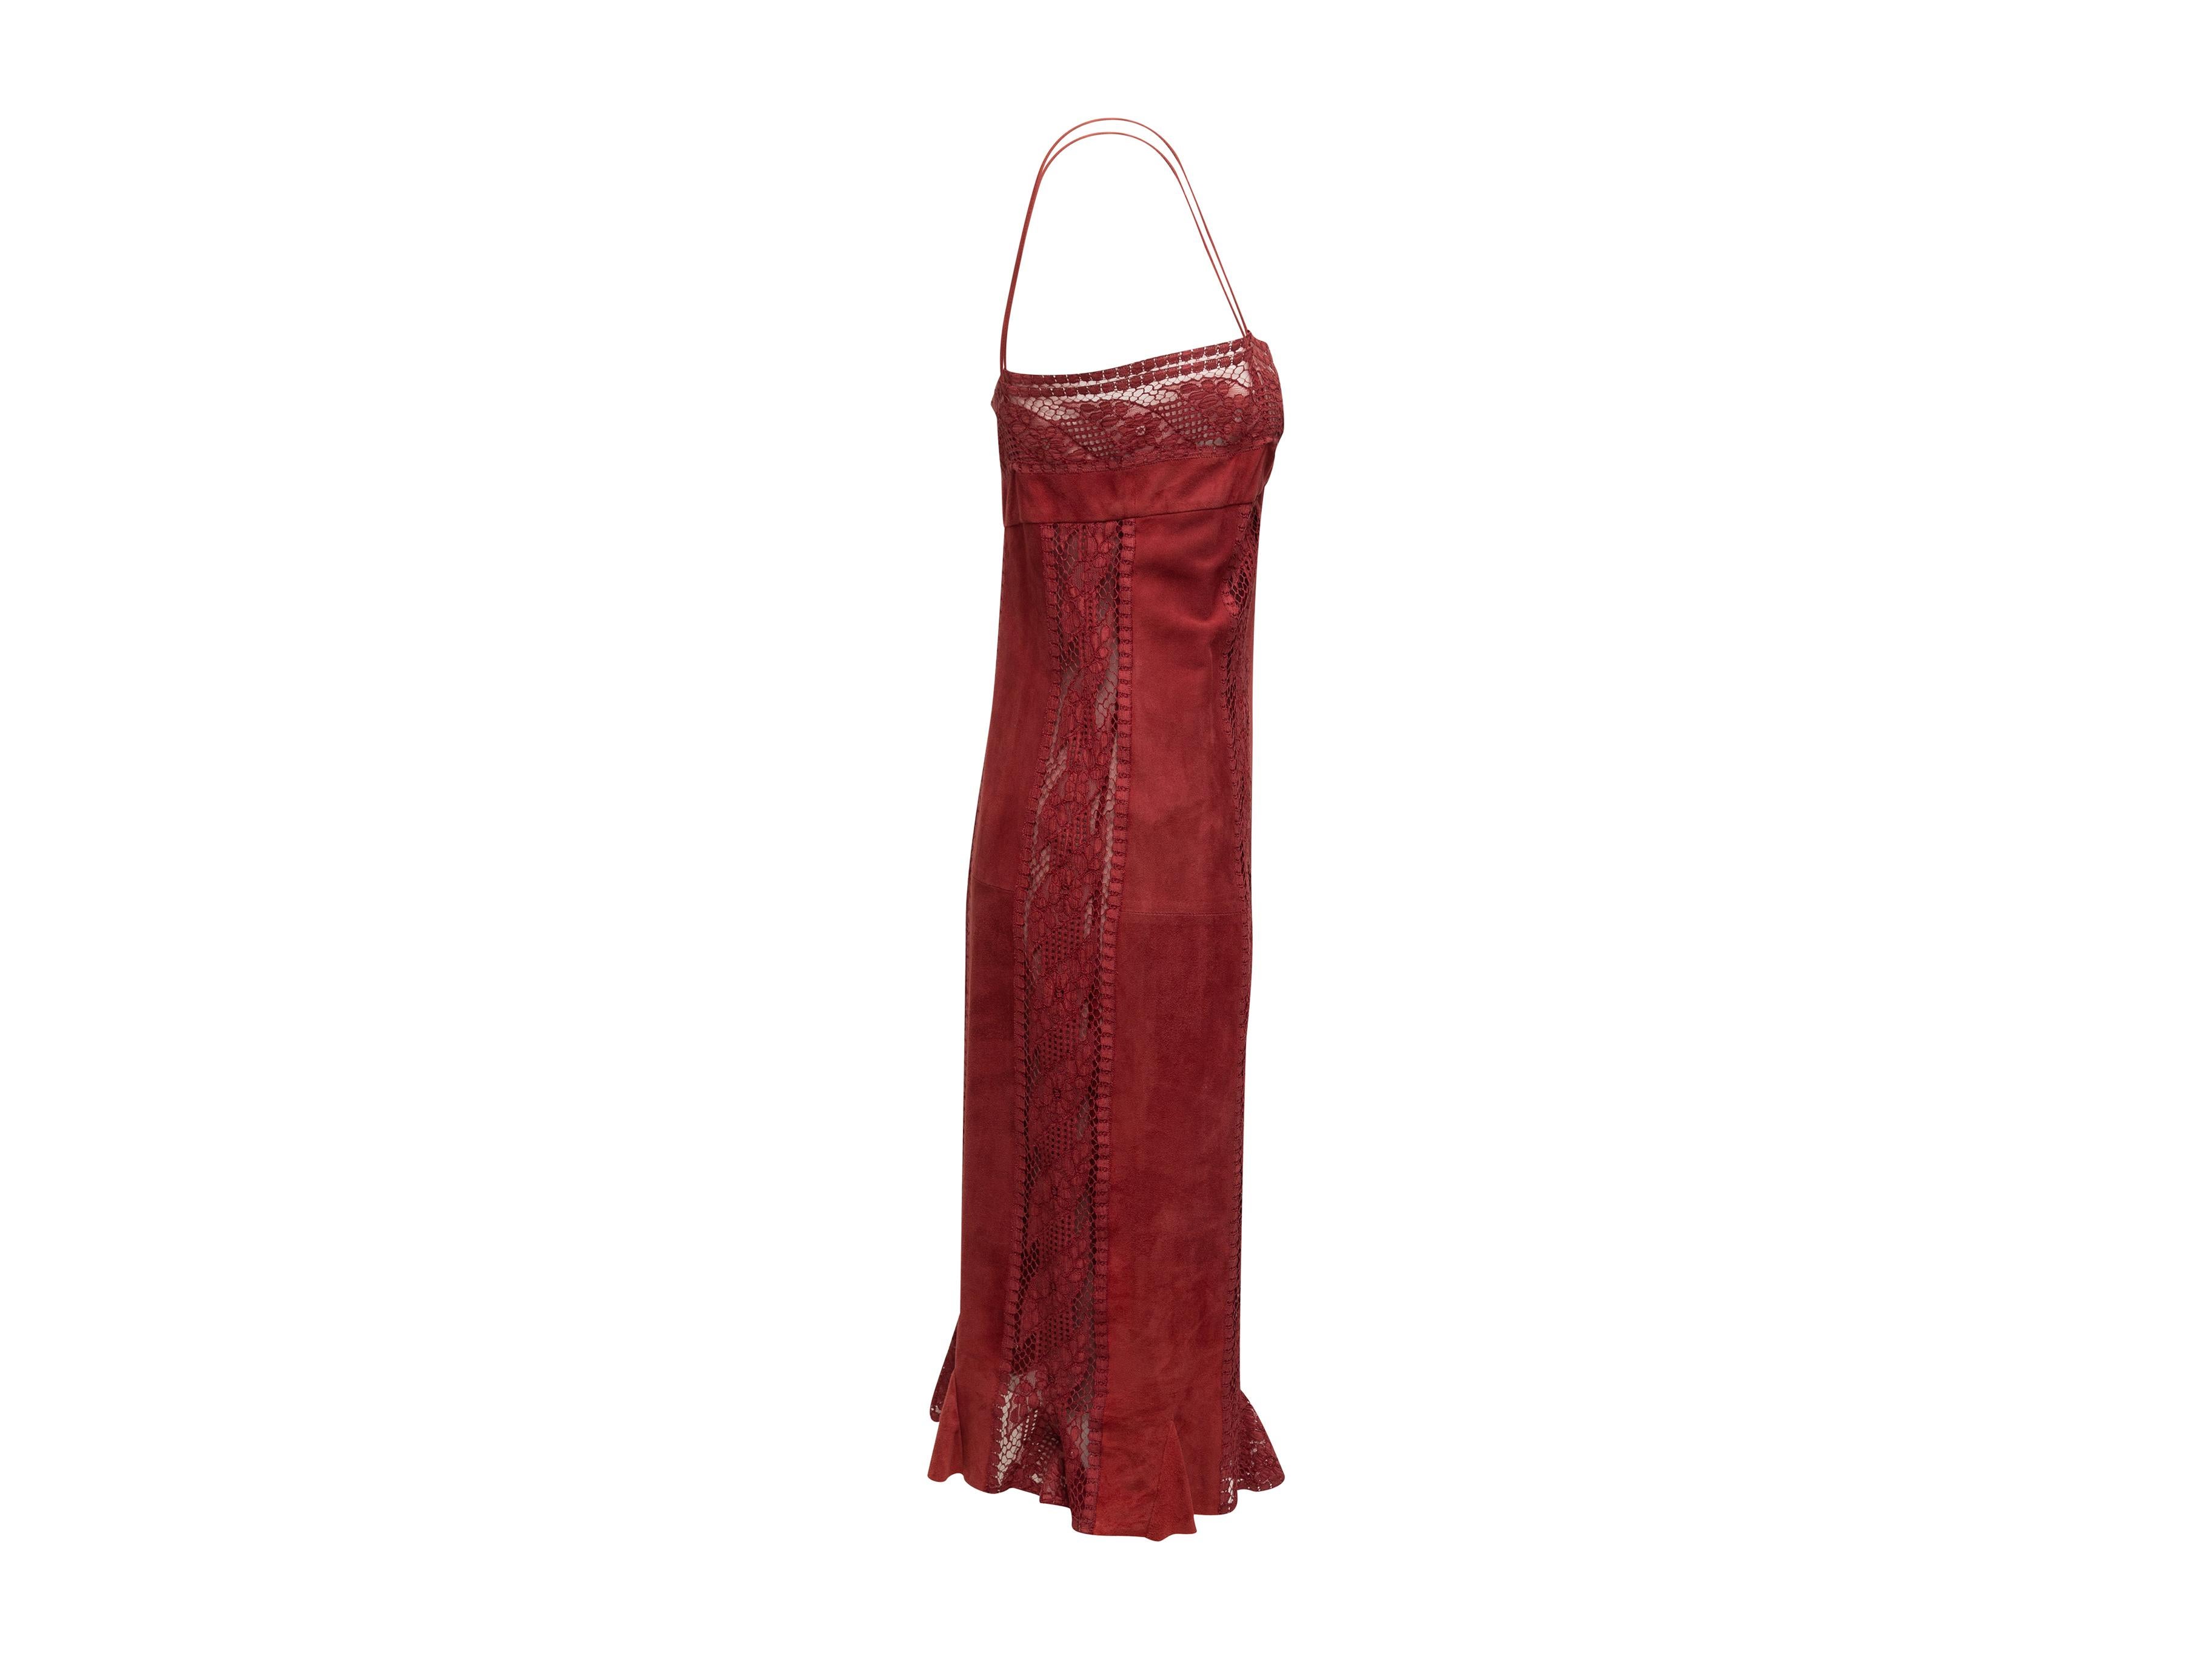 Product details: Vintage red suede and lace sleeveless dress by Valentino Boutique. Sweetheart neckline. Zip closure at side. 32